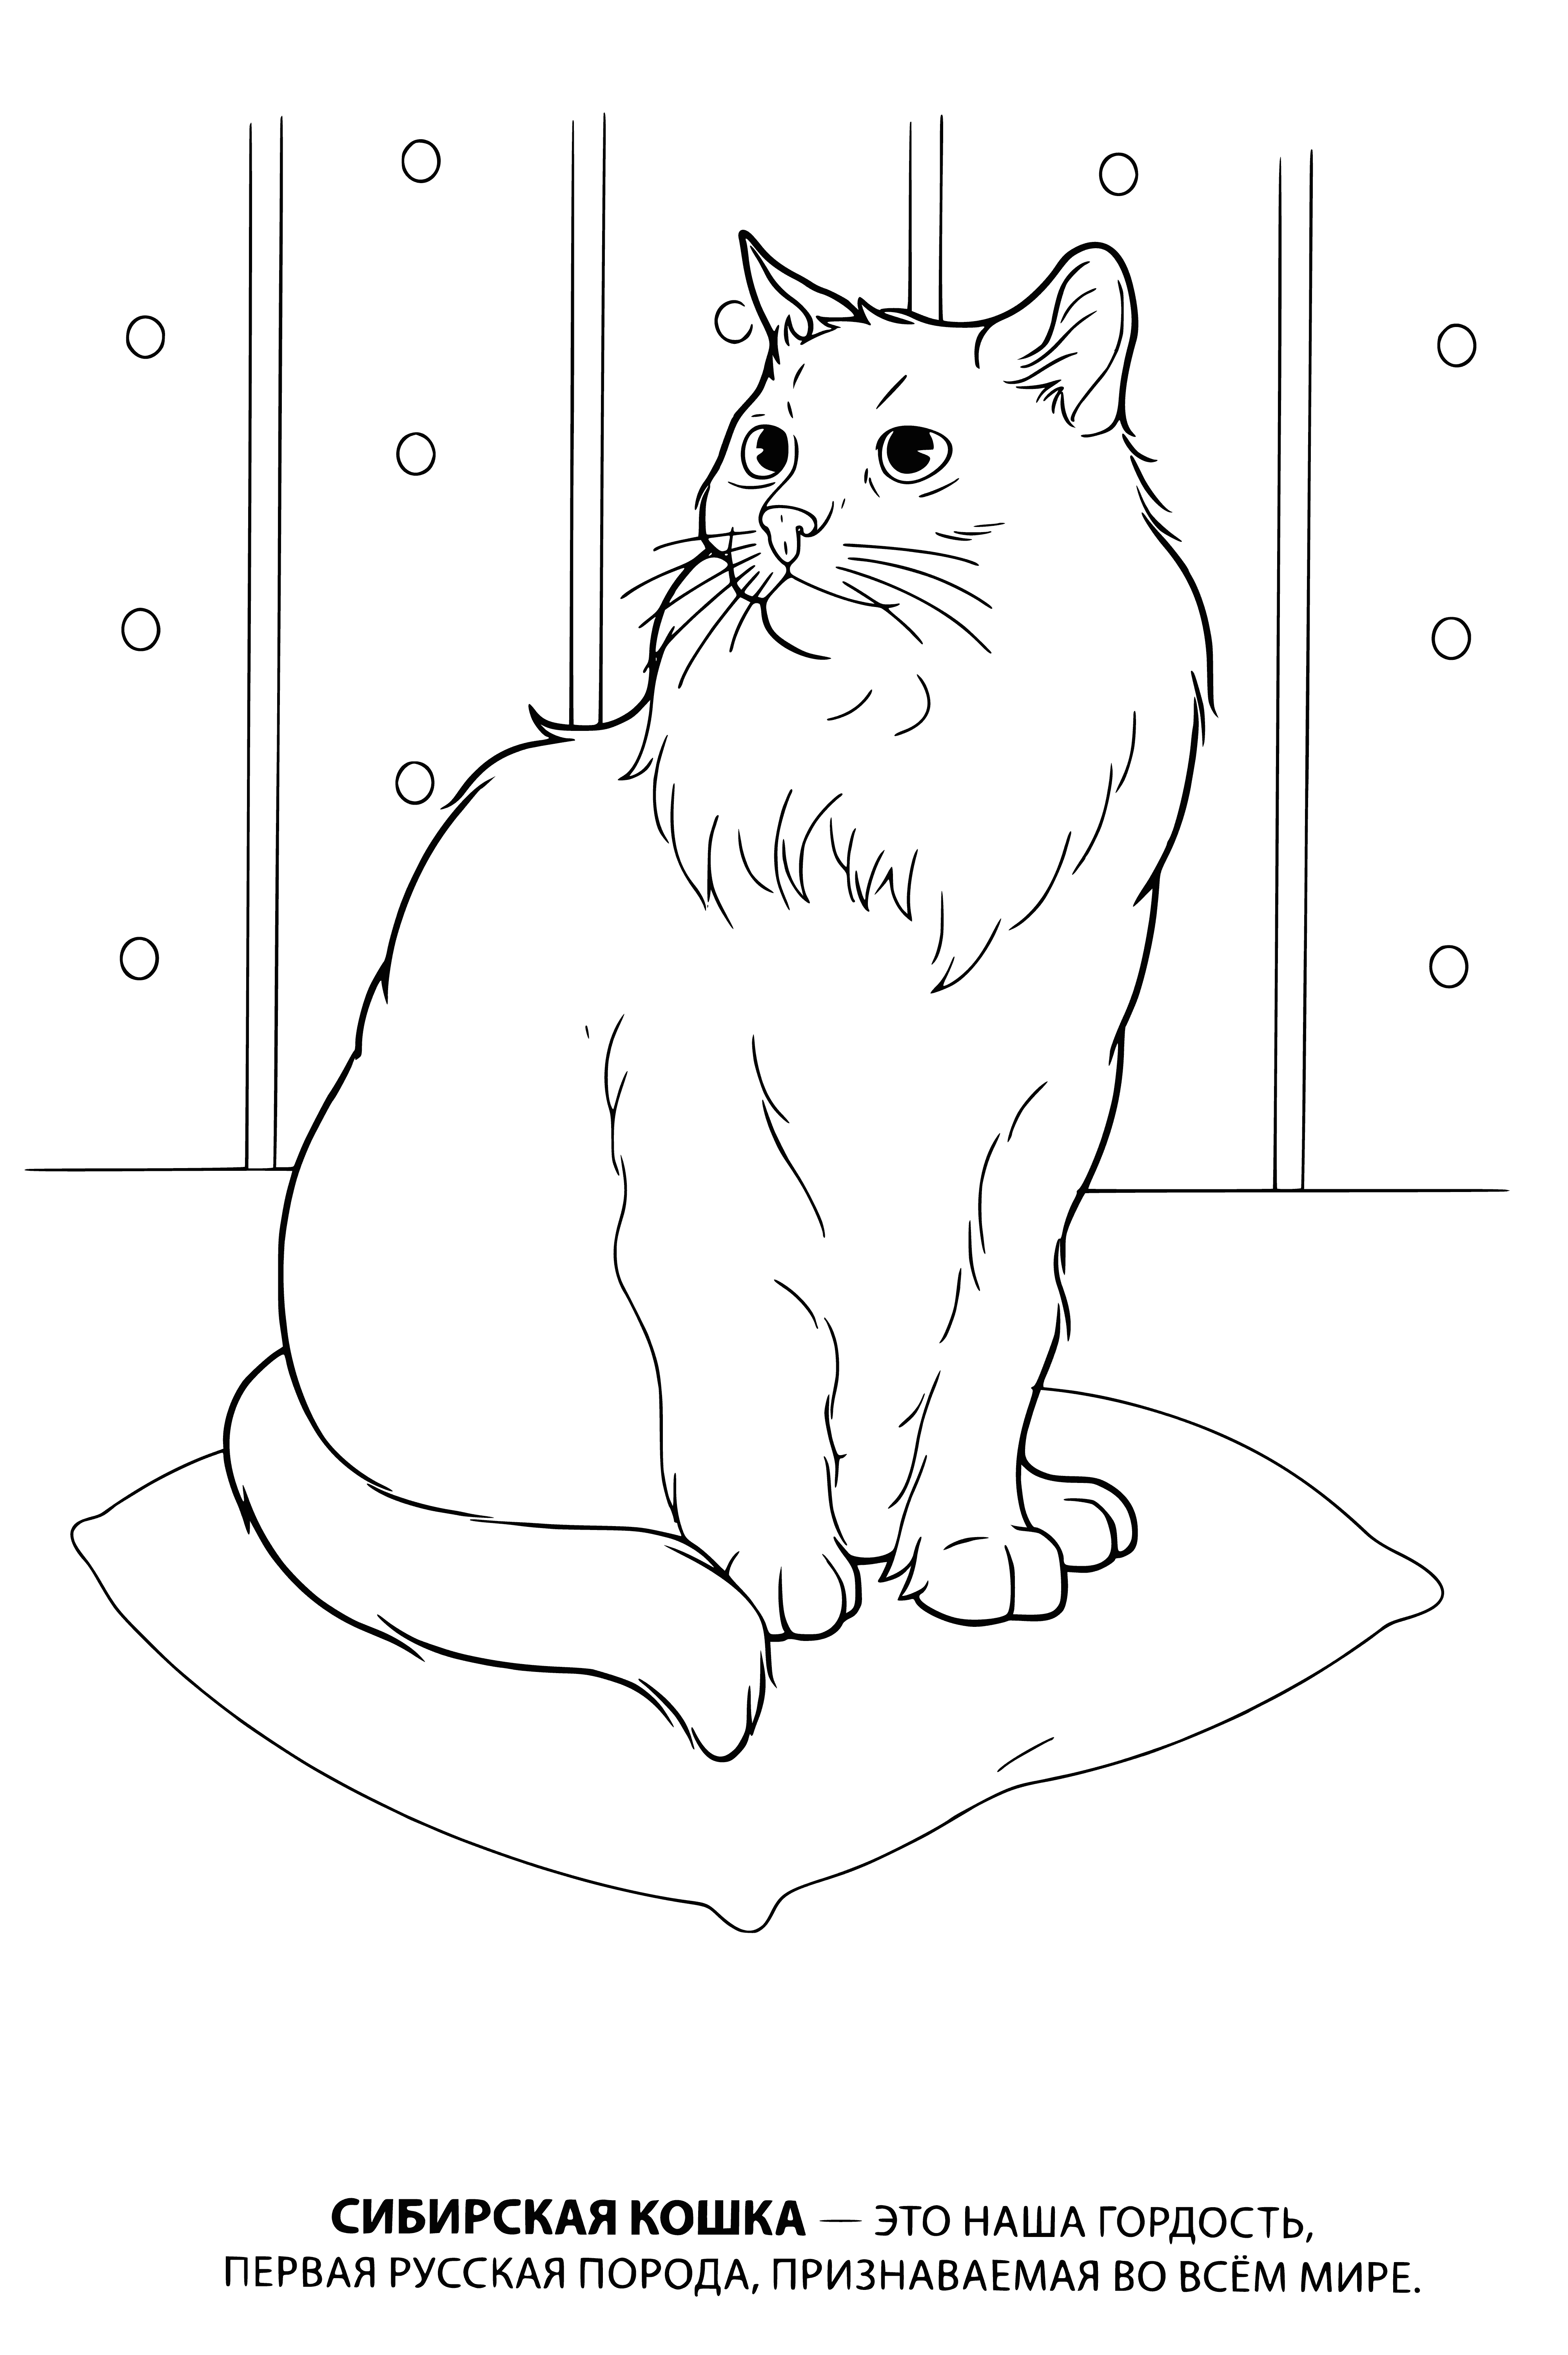 coloring page: Cat has gray/white fur, green eyes, and long tail--coloring page shows Siberian cat. #catlover